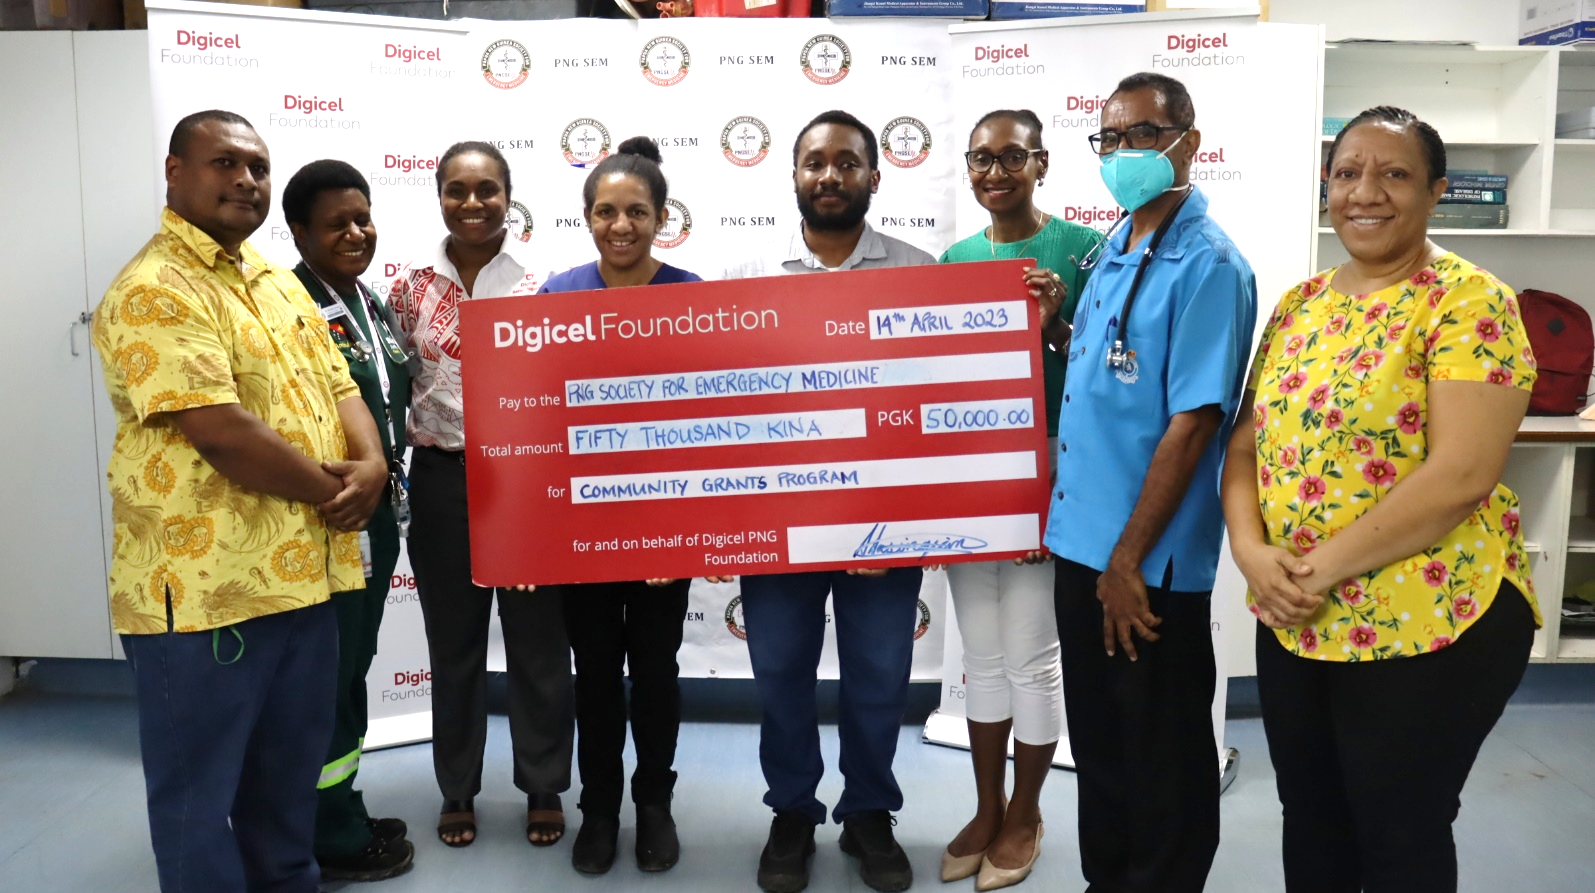 PNG Society for Emergency Medicine is one of the twenty successful recipients of the 2022-2023 Community Grants Program. Members of the PNG Society for Emergency Medicine received a cheque worth K50,000 from Digicel Foundation team for its Point of Care Ultrasound in PNG.